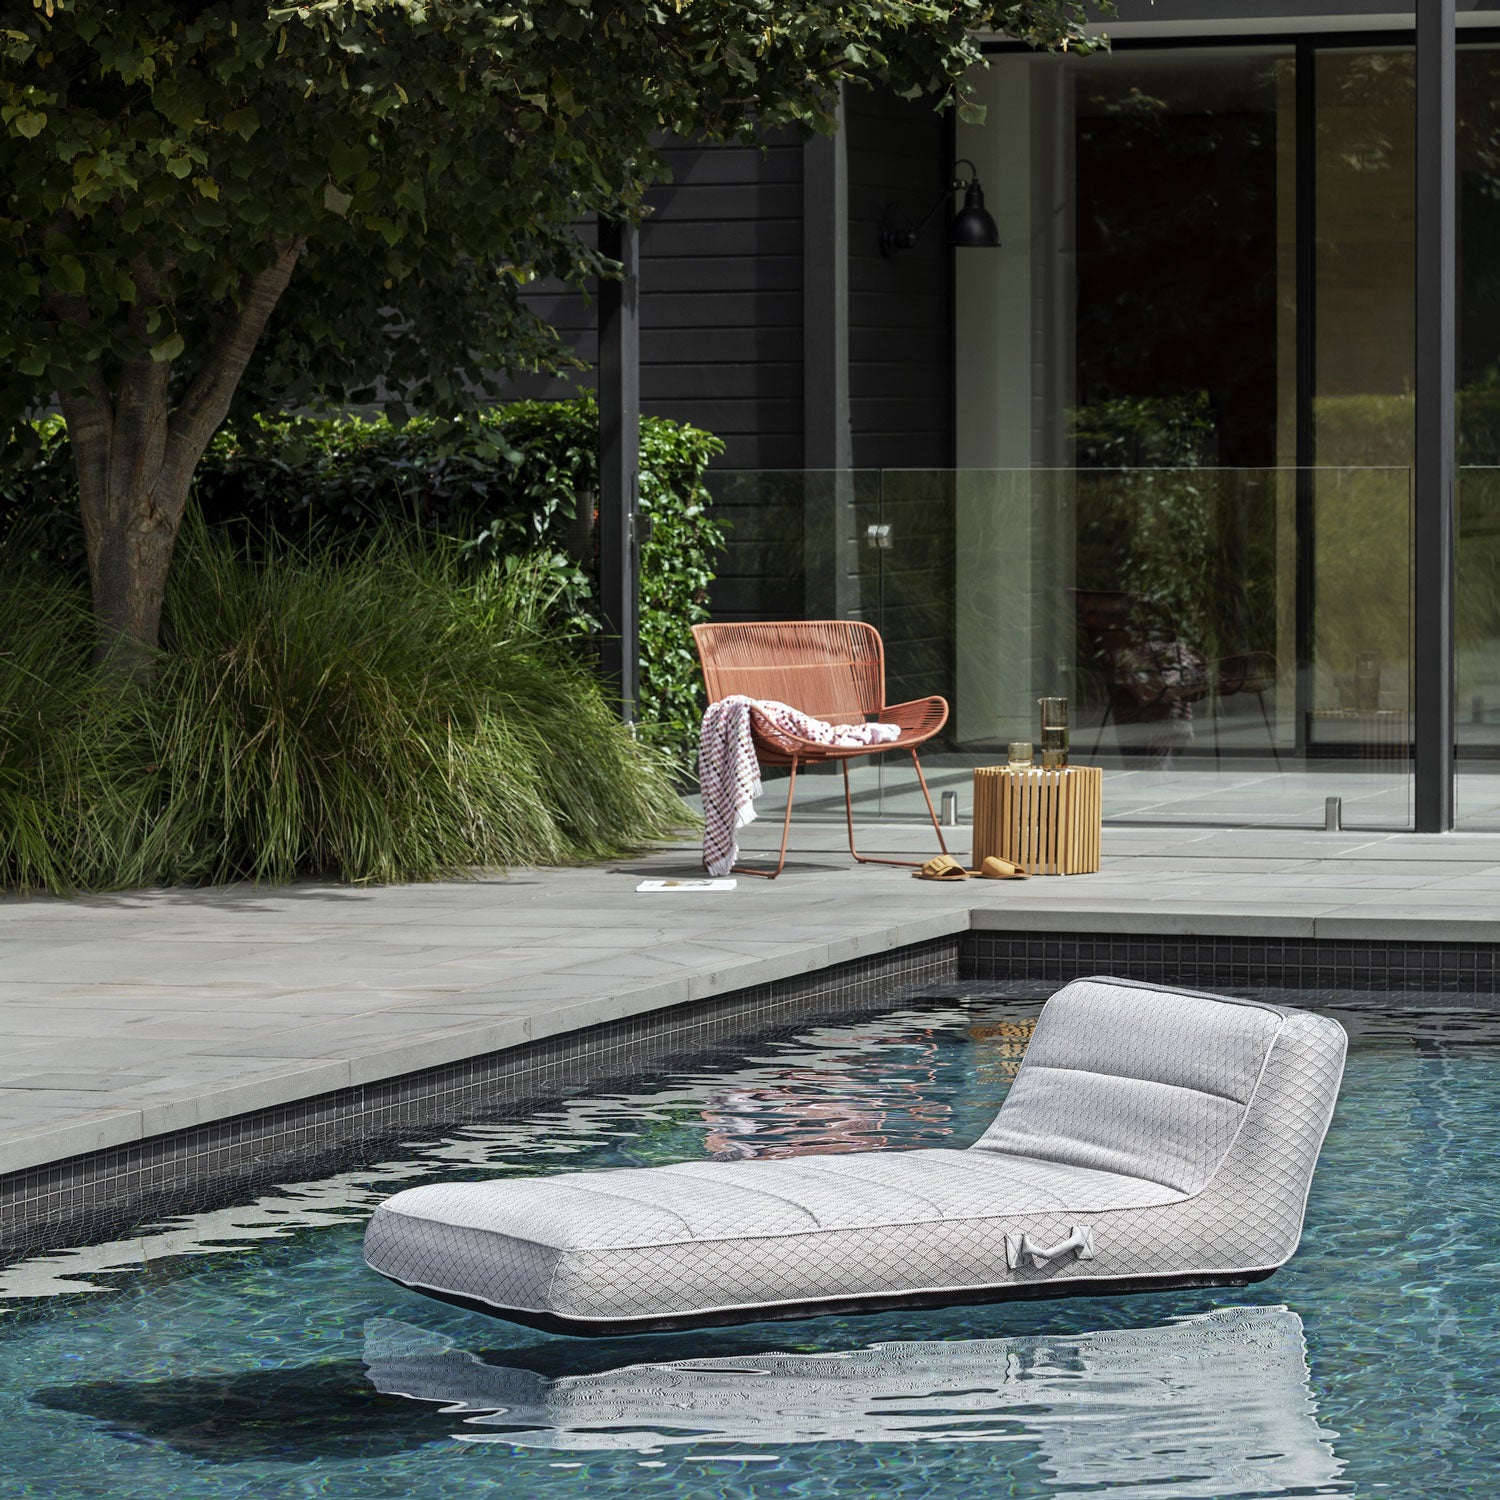 A black and silver luxury pool float floating in a swimming pool with a chair and glass pool house in the background.